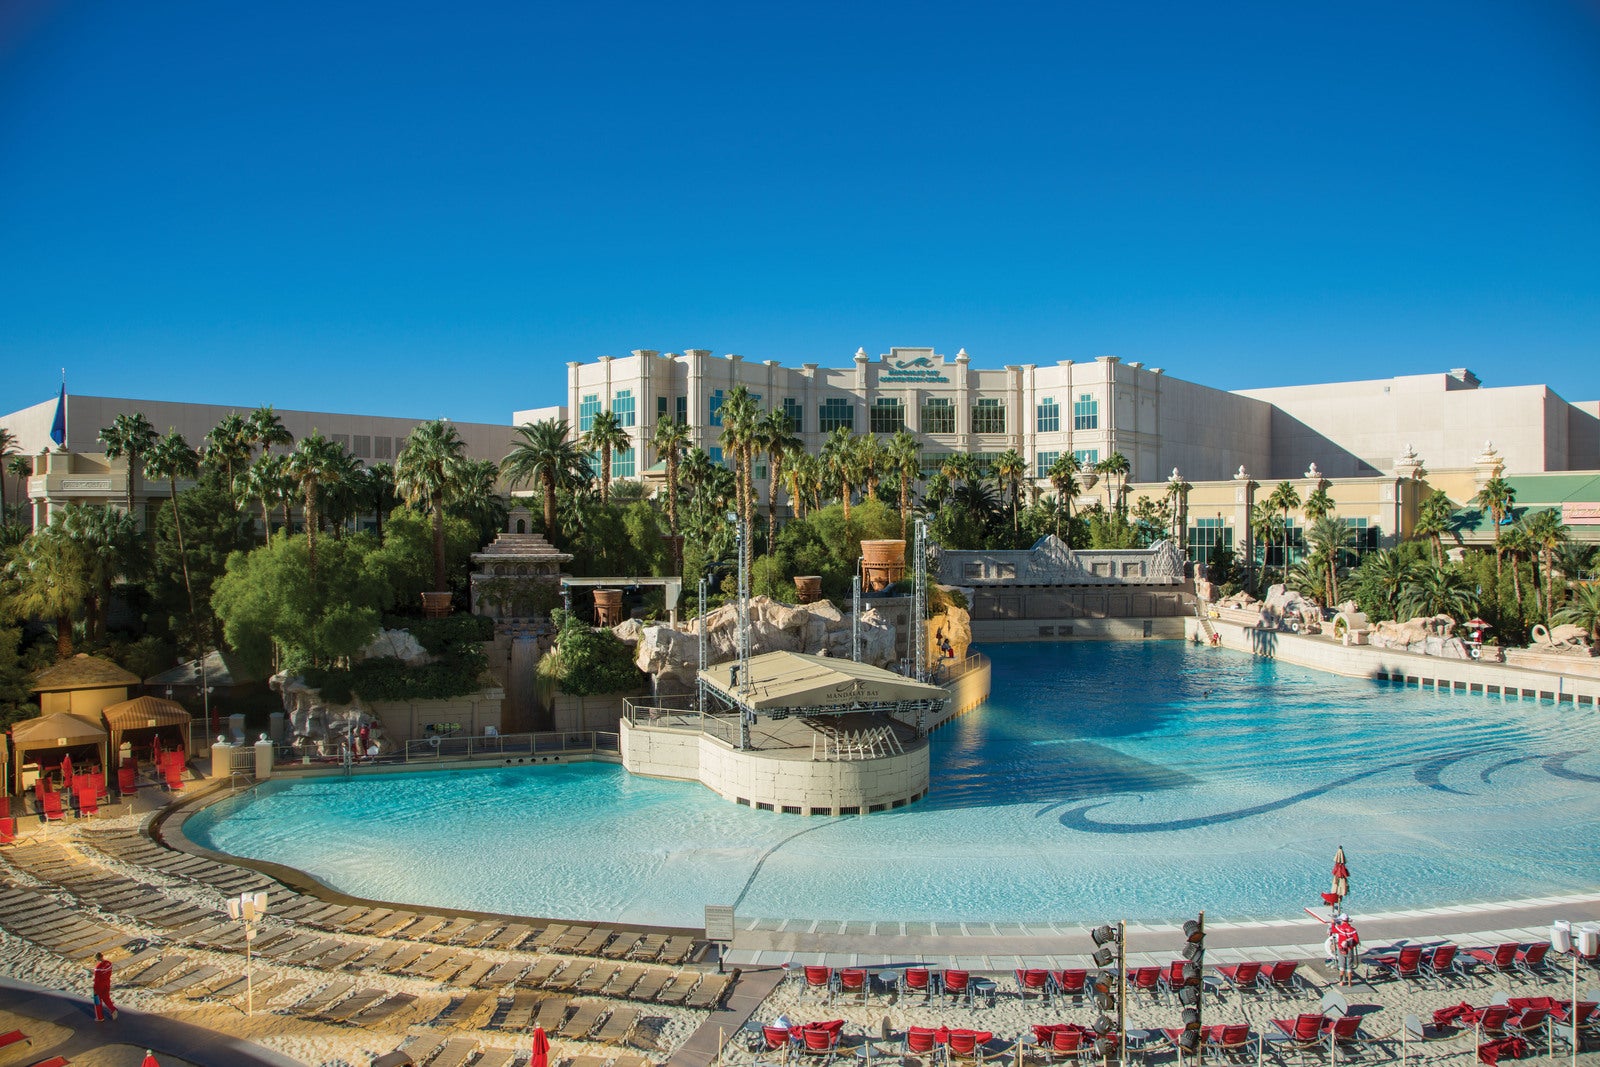 Mandalay Bay Pool Las Vegas Guide - Prices and Hours [2022]